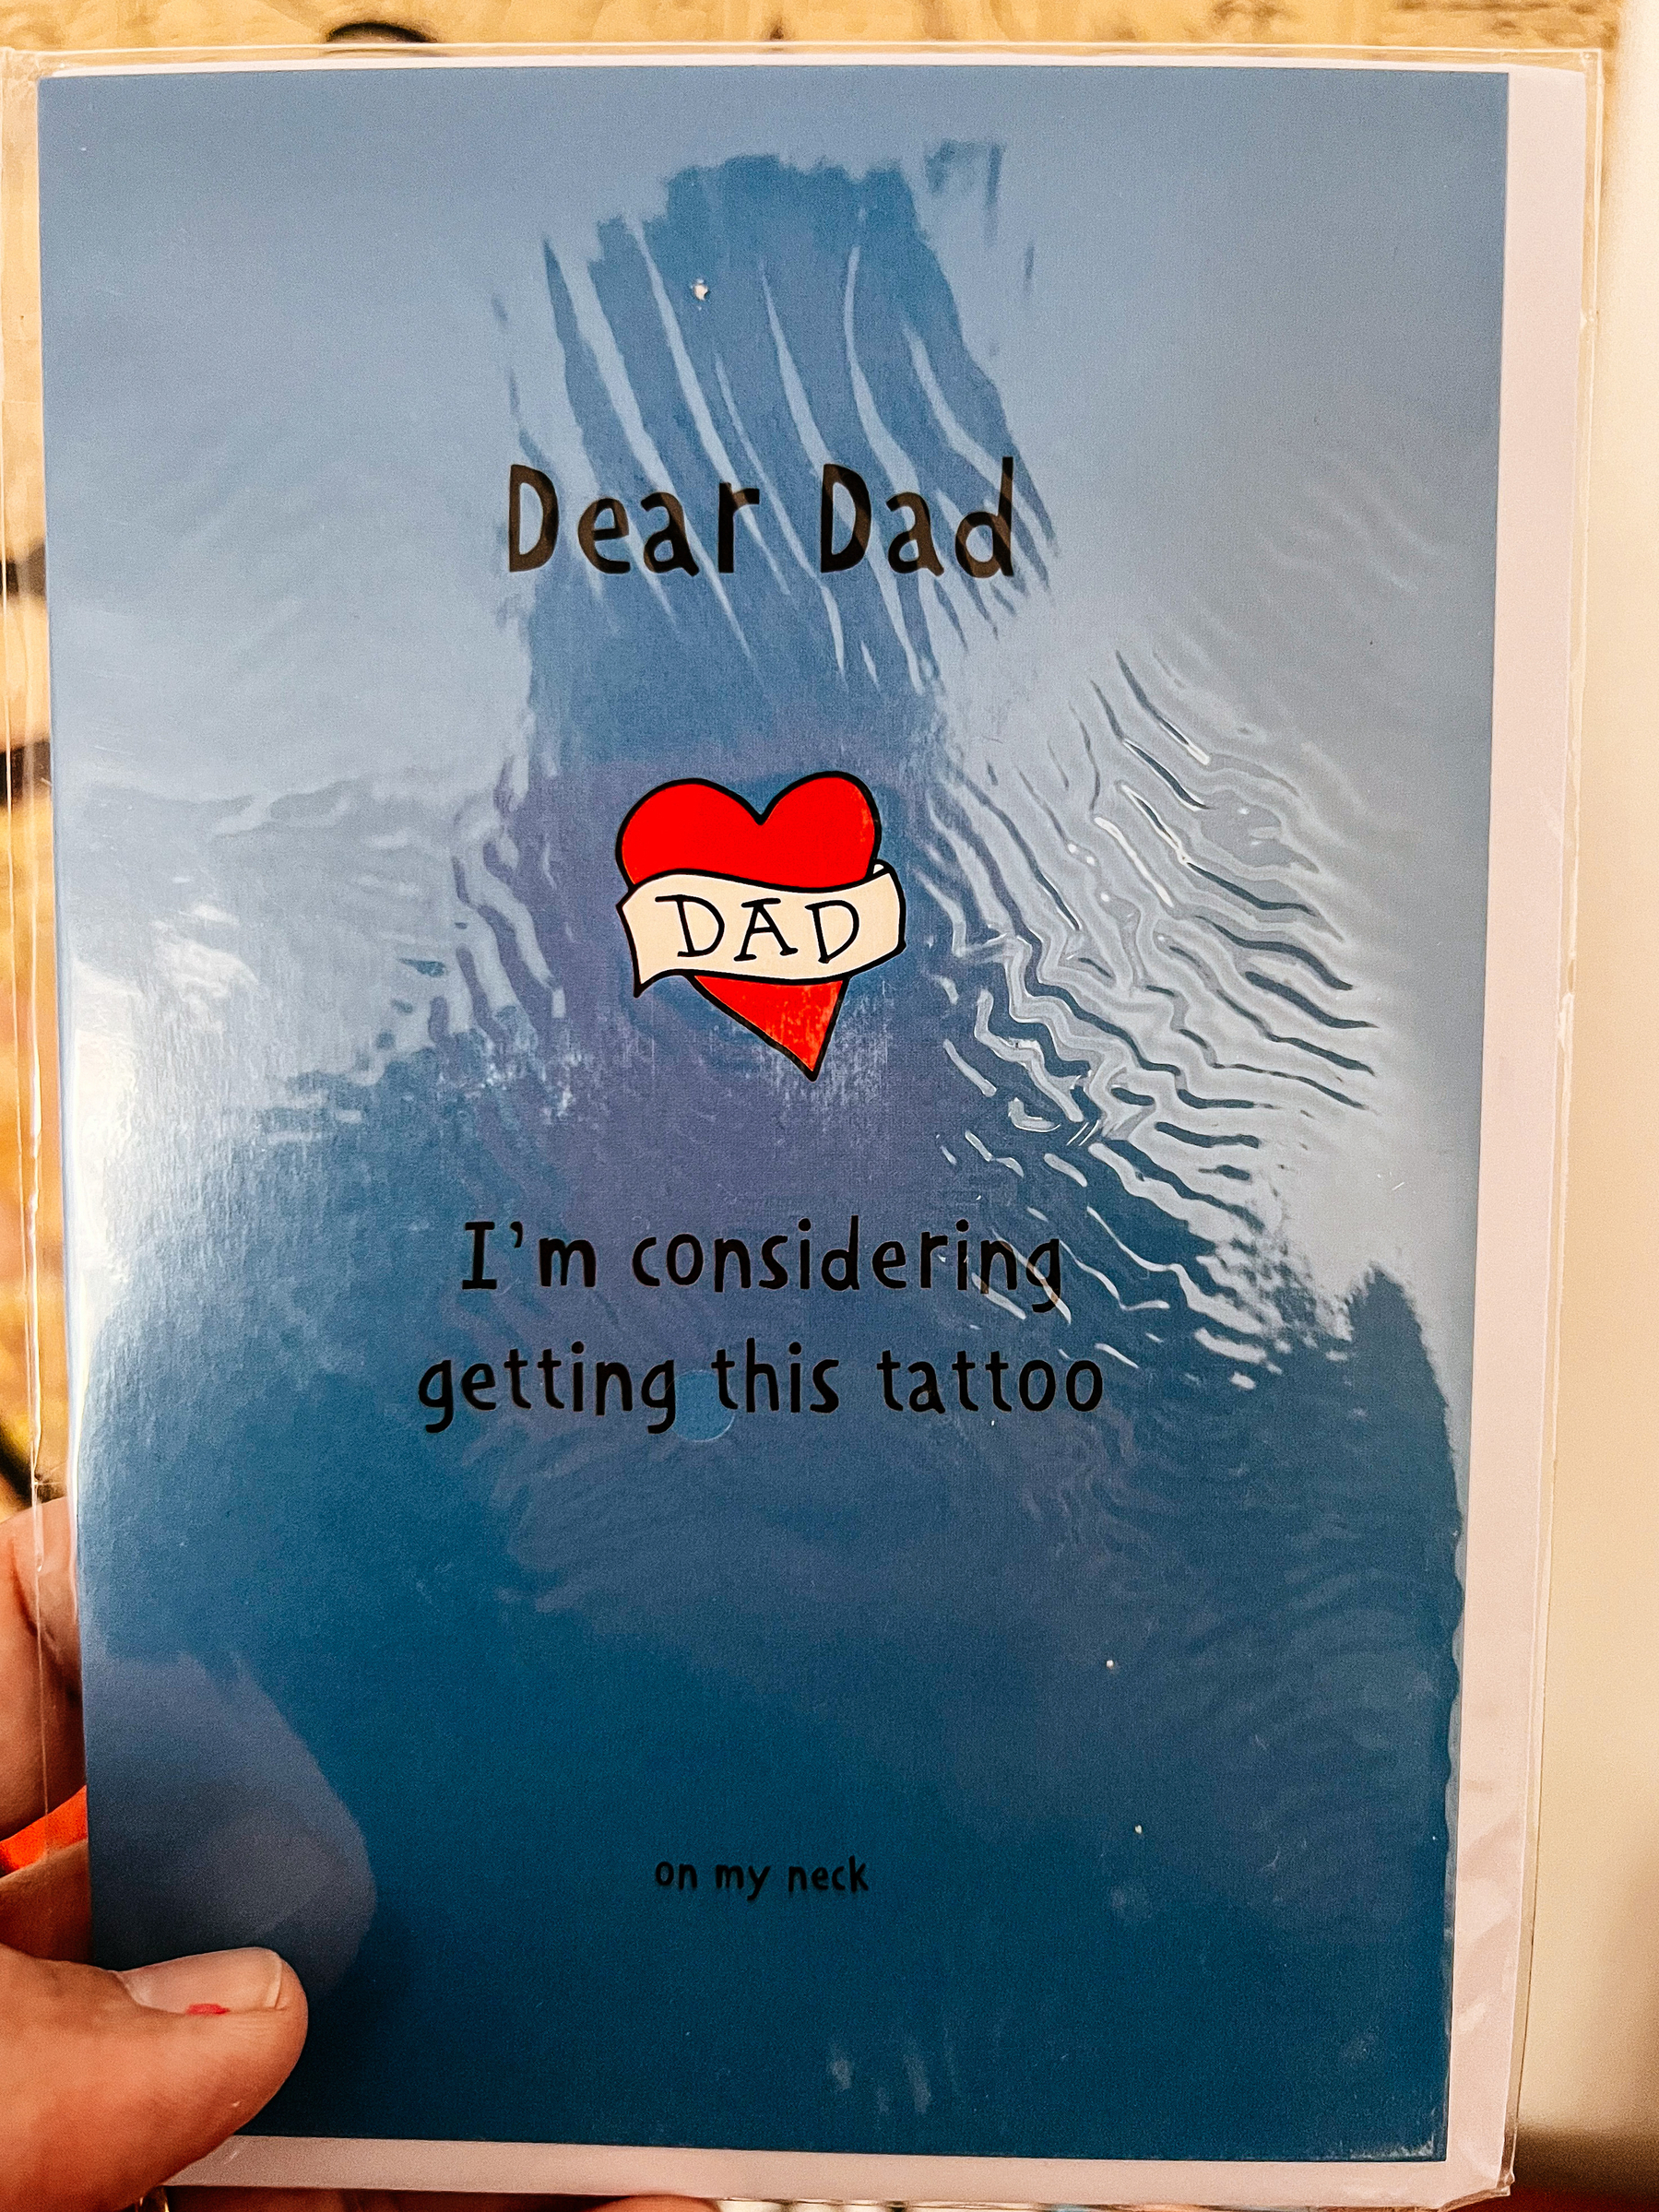 a postcard with a tattoo design of a heart with the word “dad” over it, and “Dear dad, I’m considering getting this tattoo… on my neck”. 